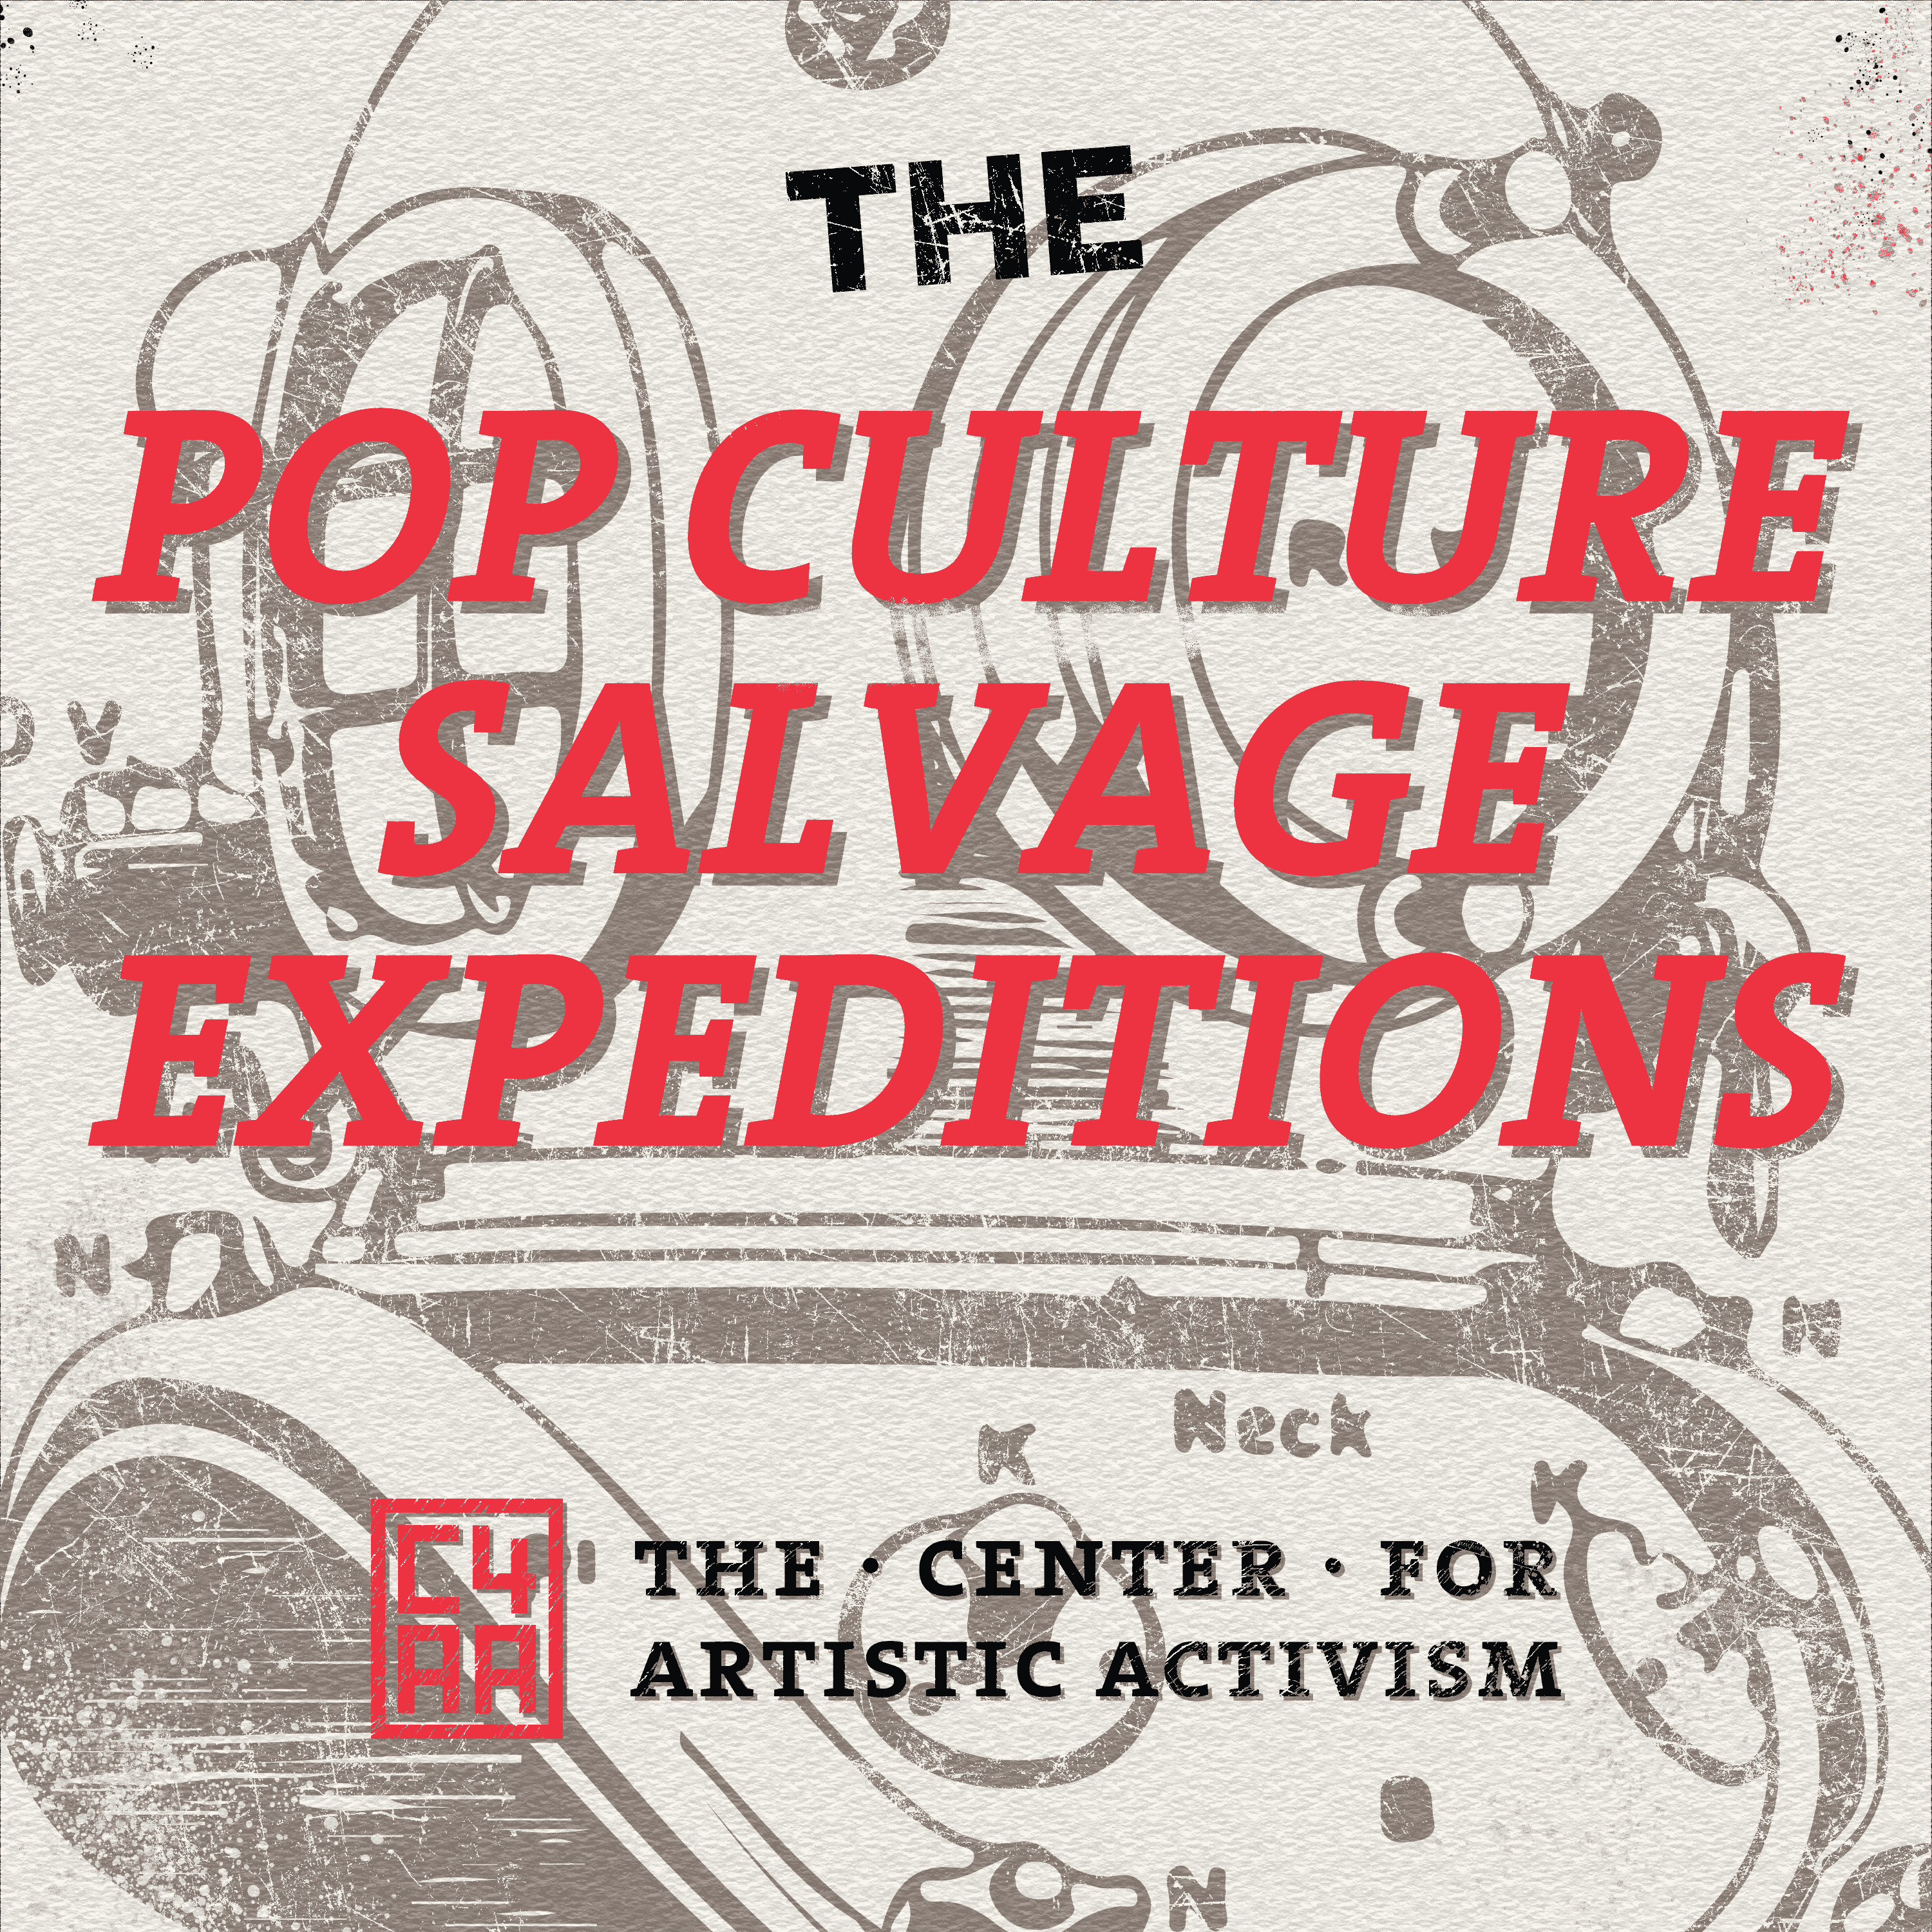 The Pop Culture Salvage Expeditions